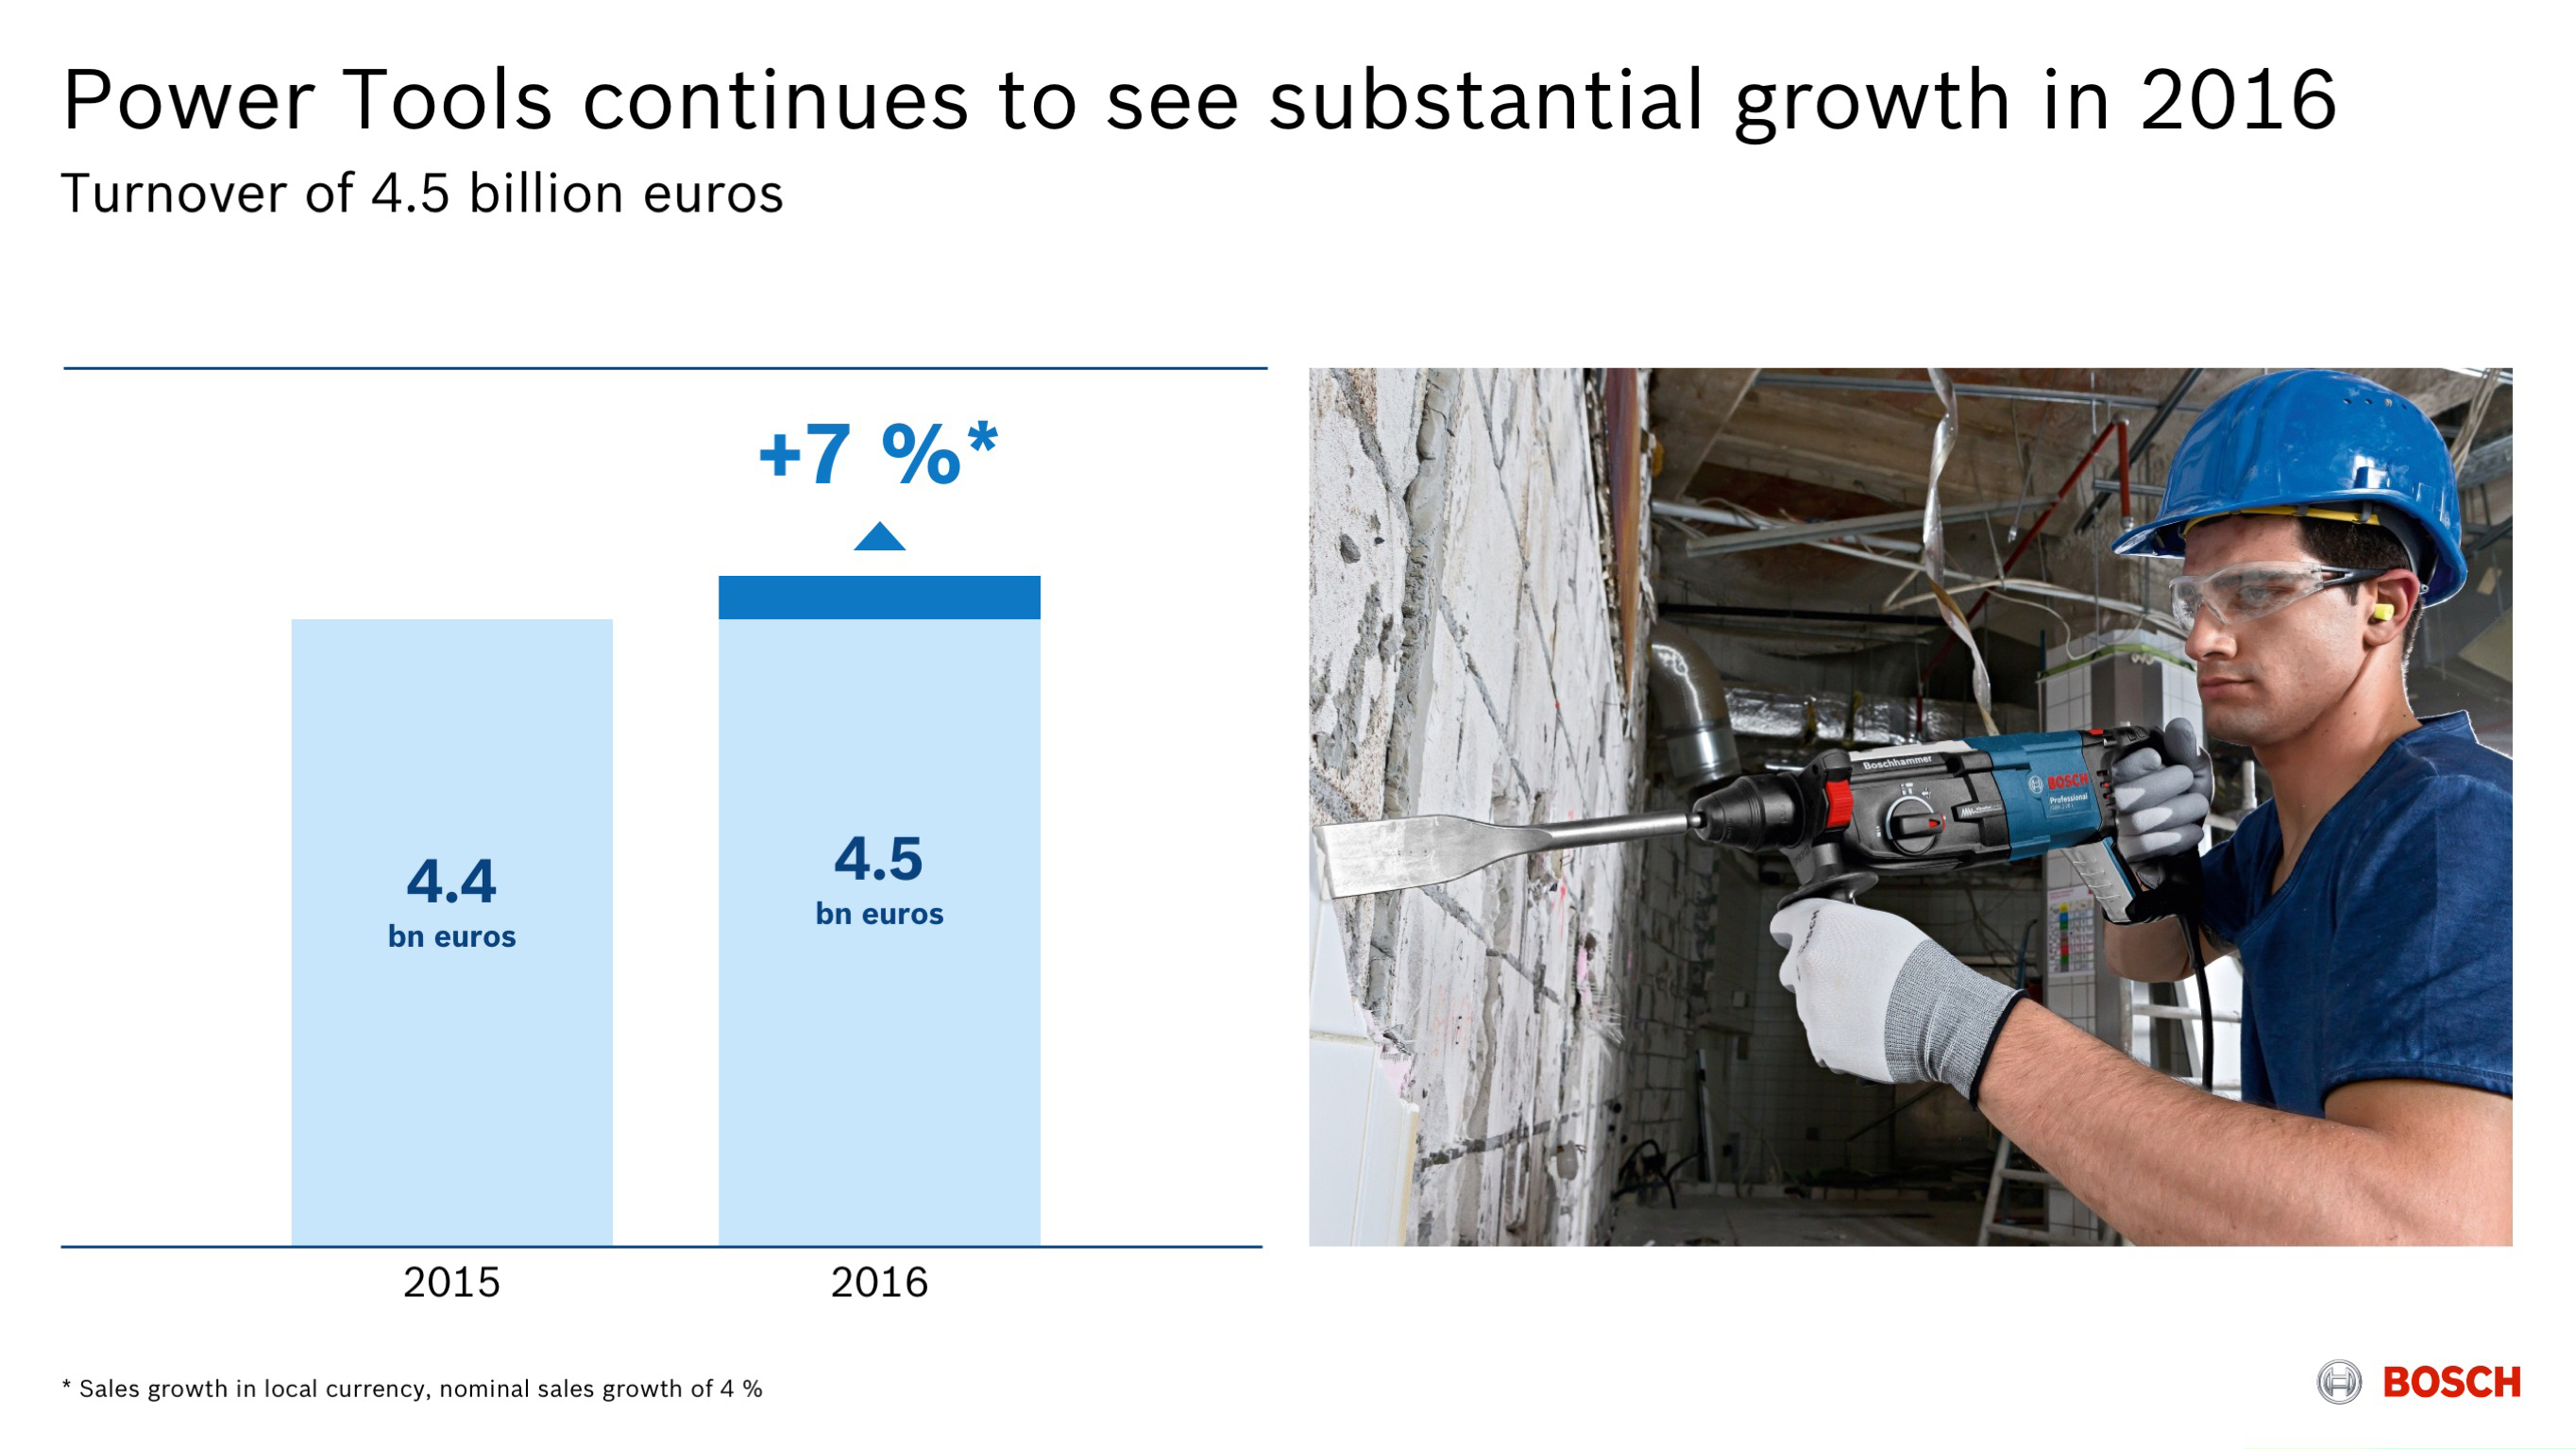 Bosch Power Tools Division Sales growth in 2016 